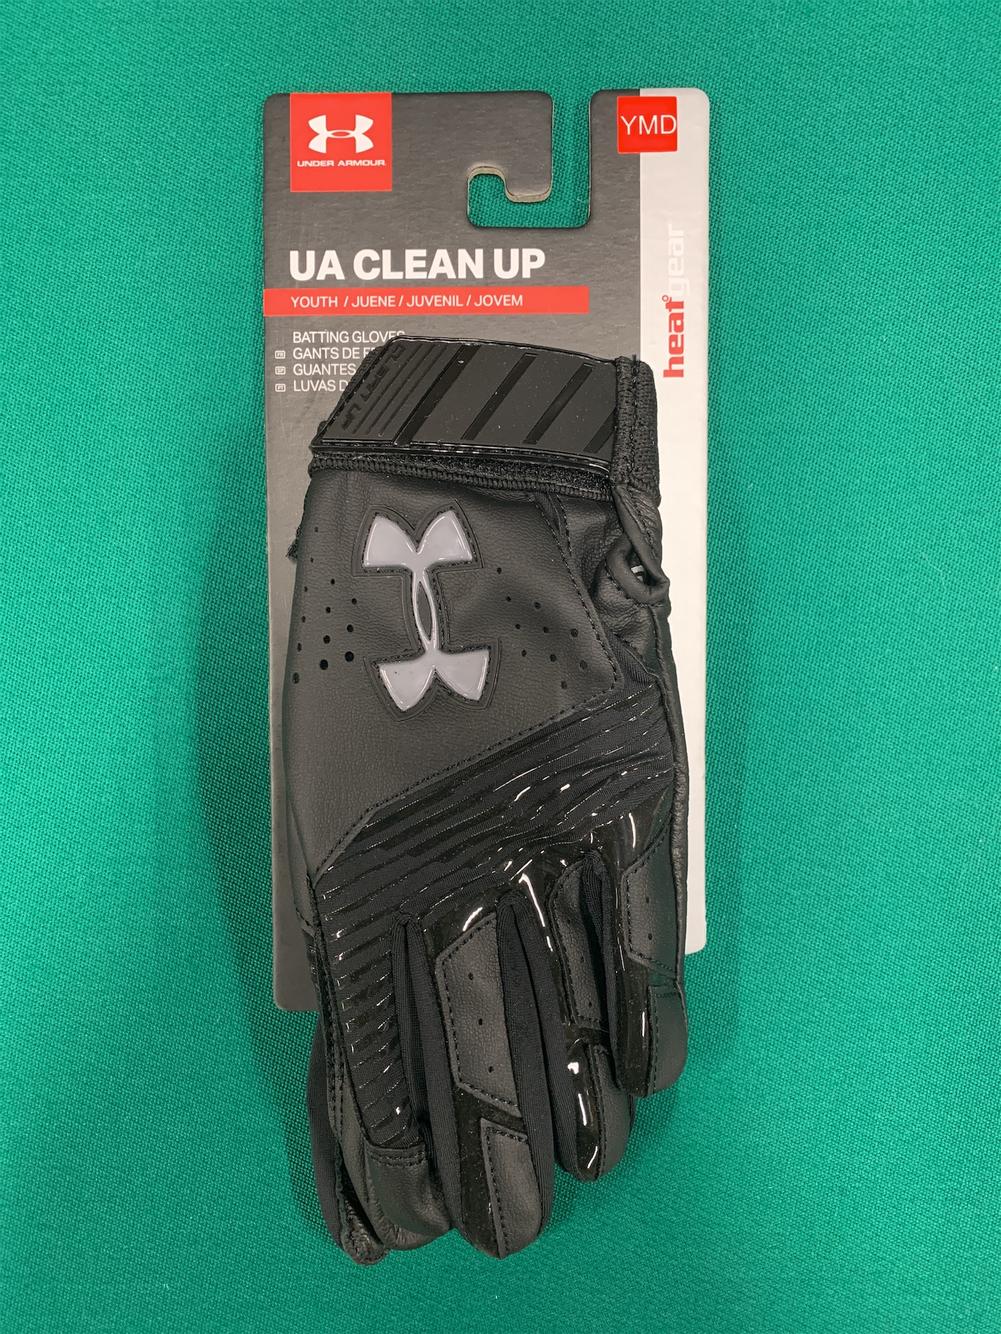 Under Armour UA Clean up Batting Gloves Youth Size YSM Black 1291216 001 for sale online 